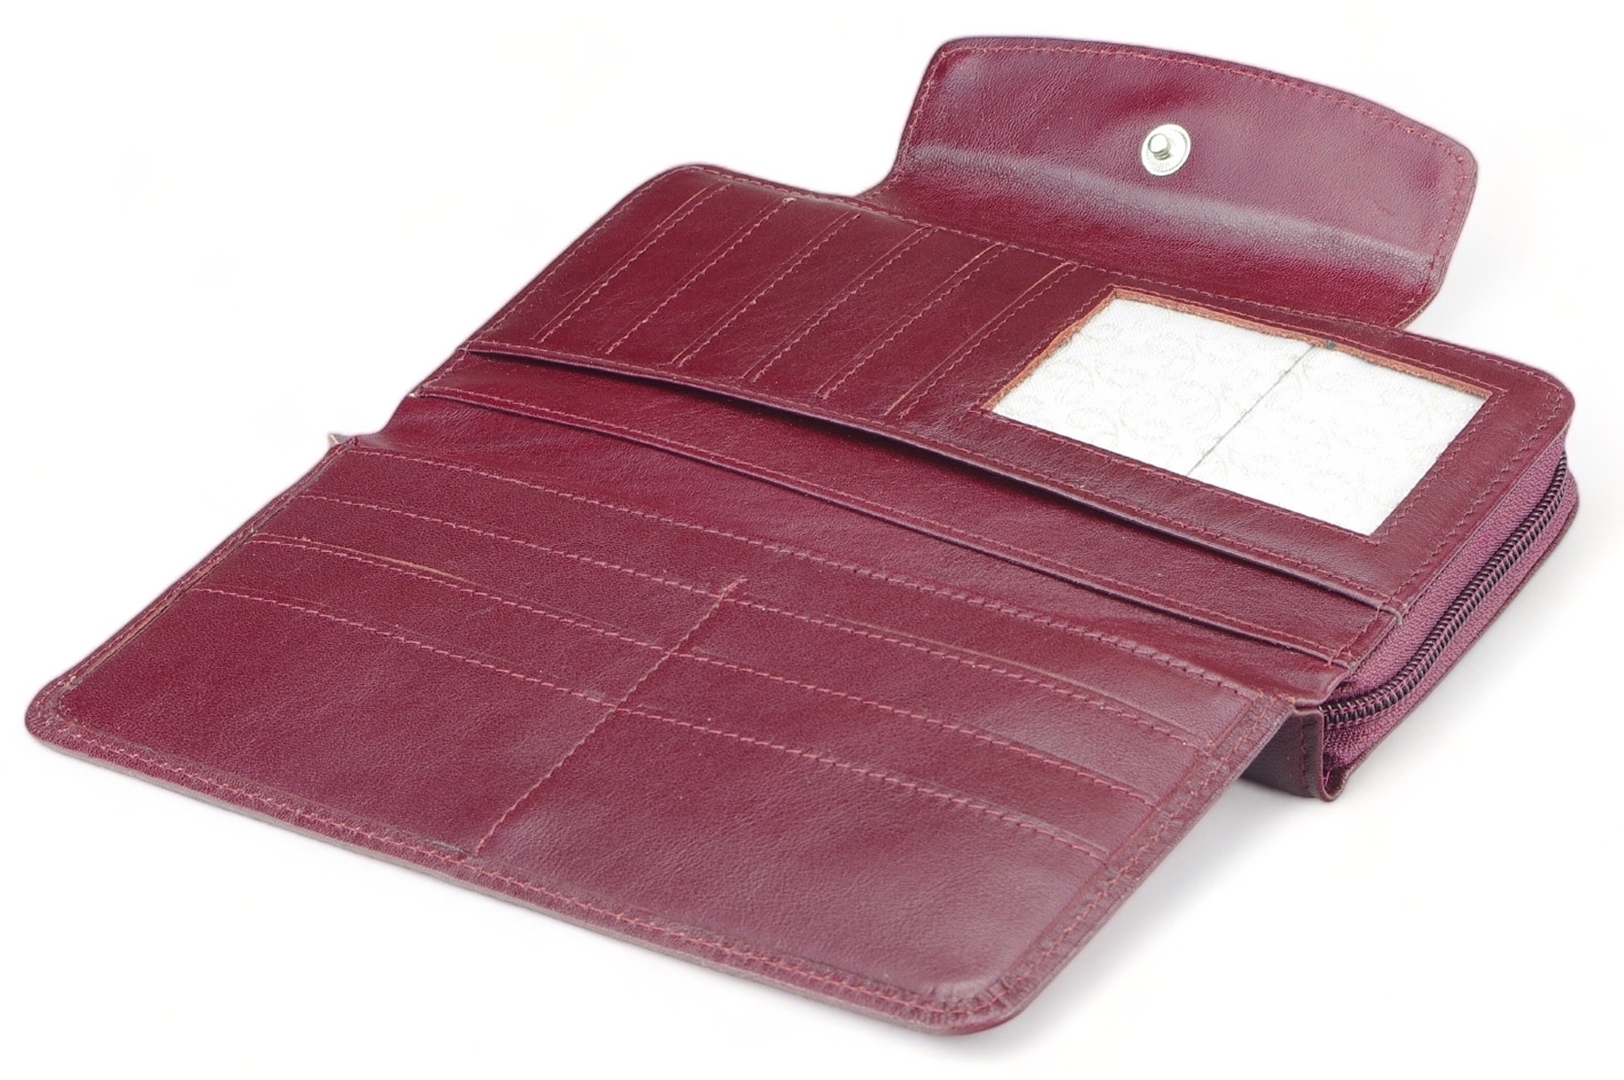 a LEATHER WALLET Model 305 BL-0-6